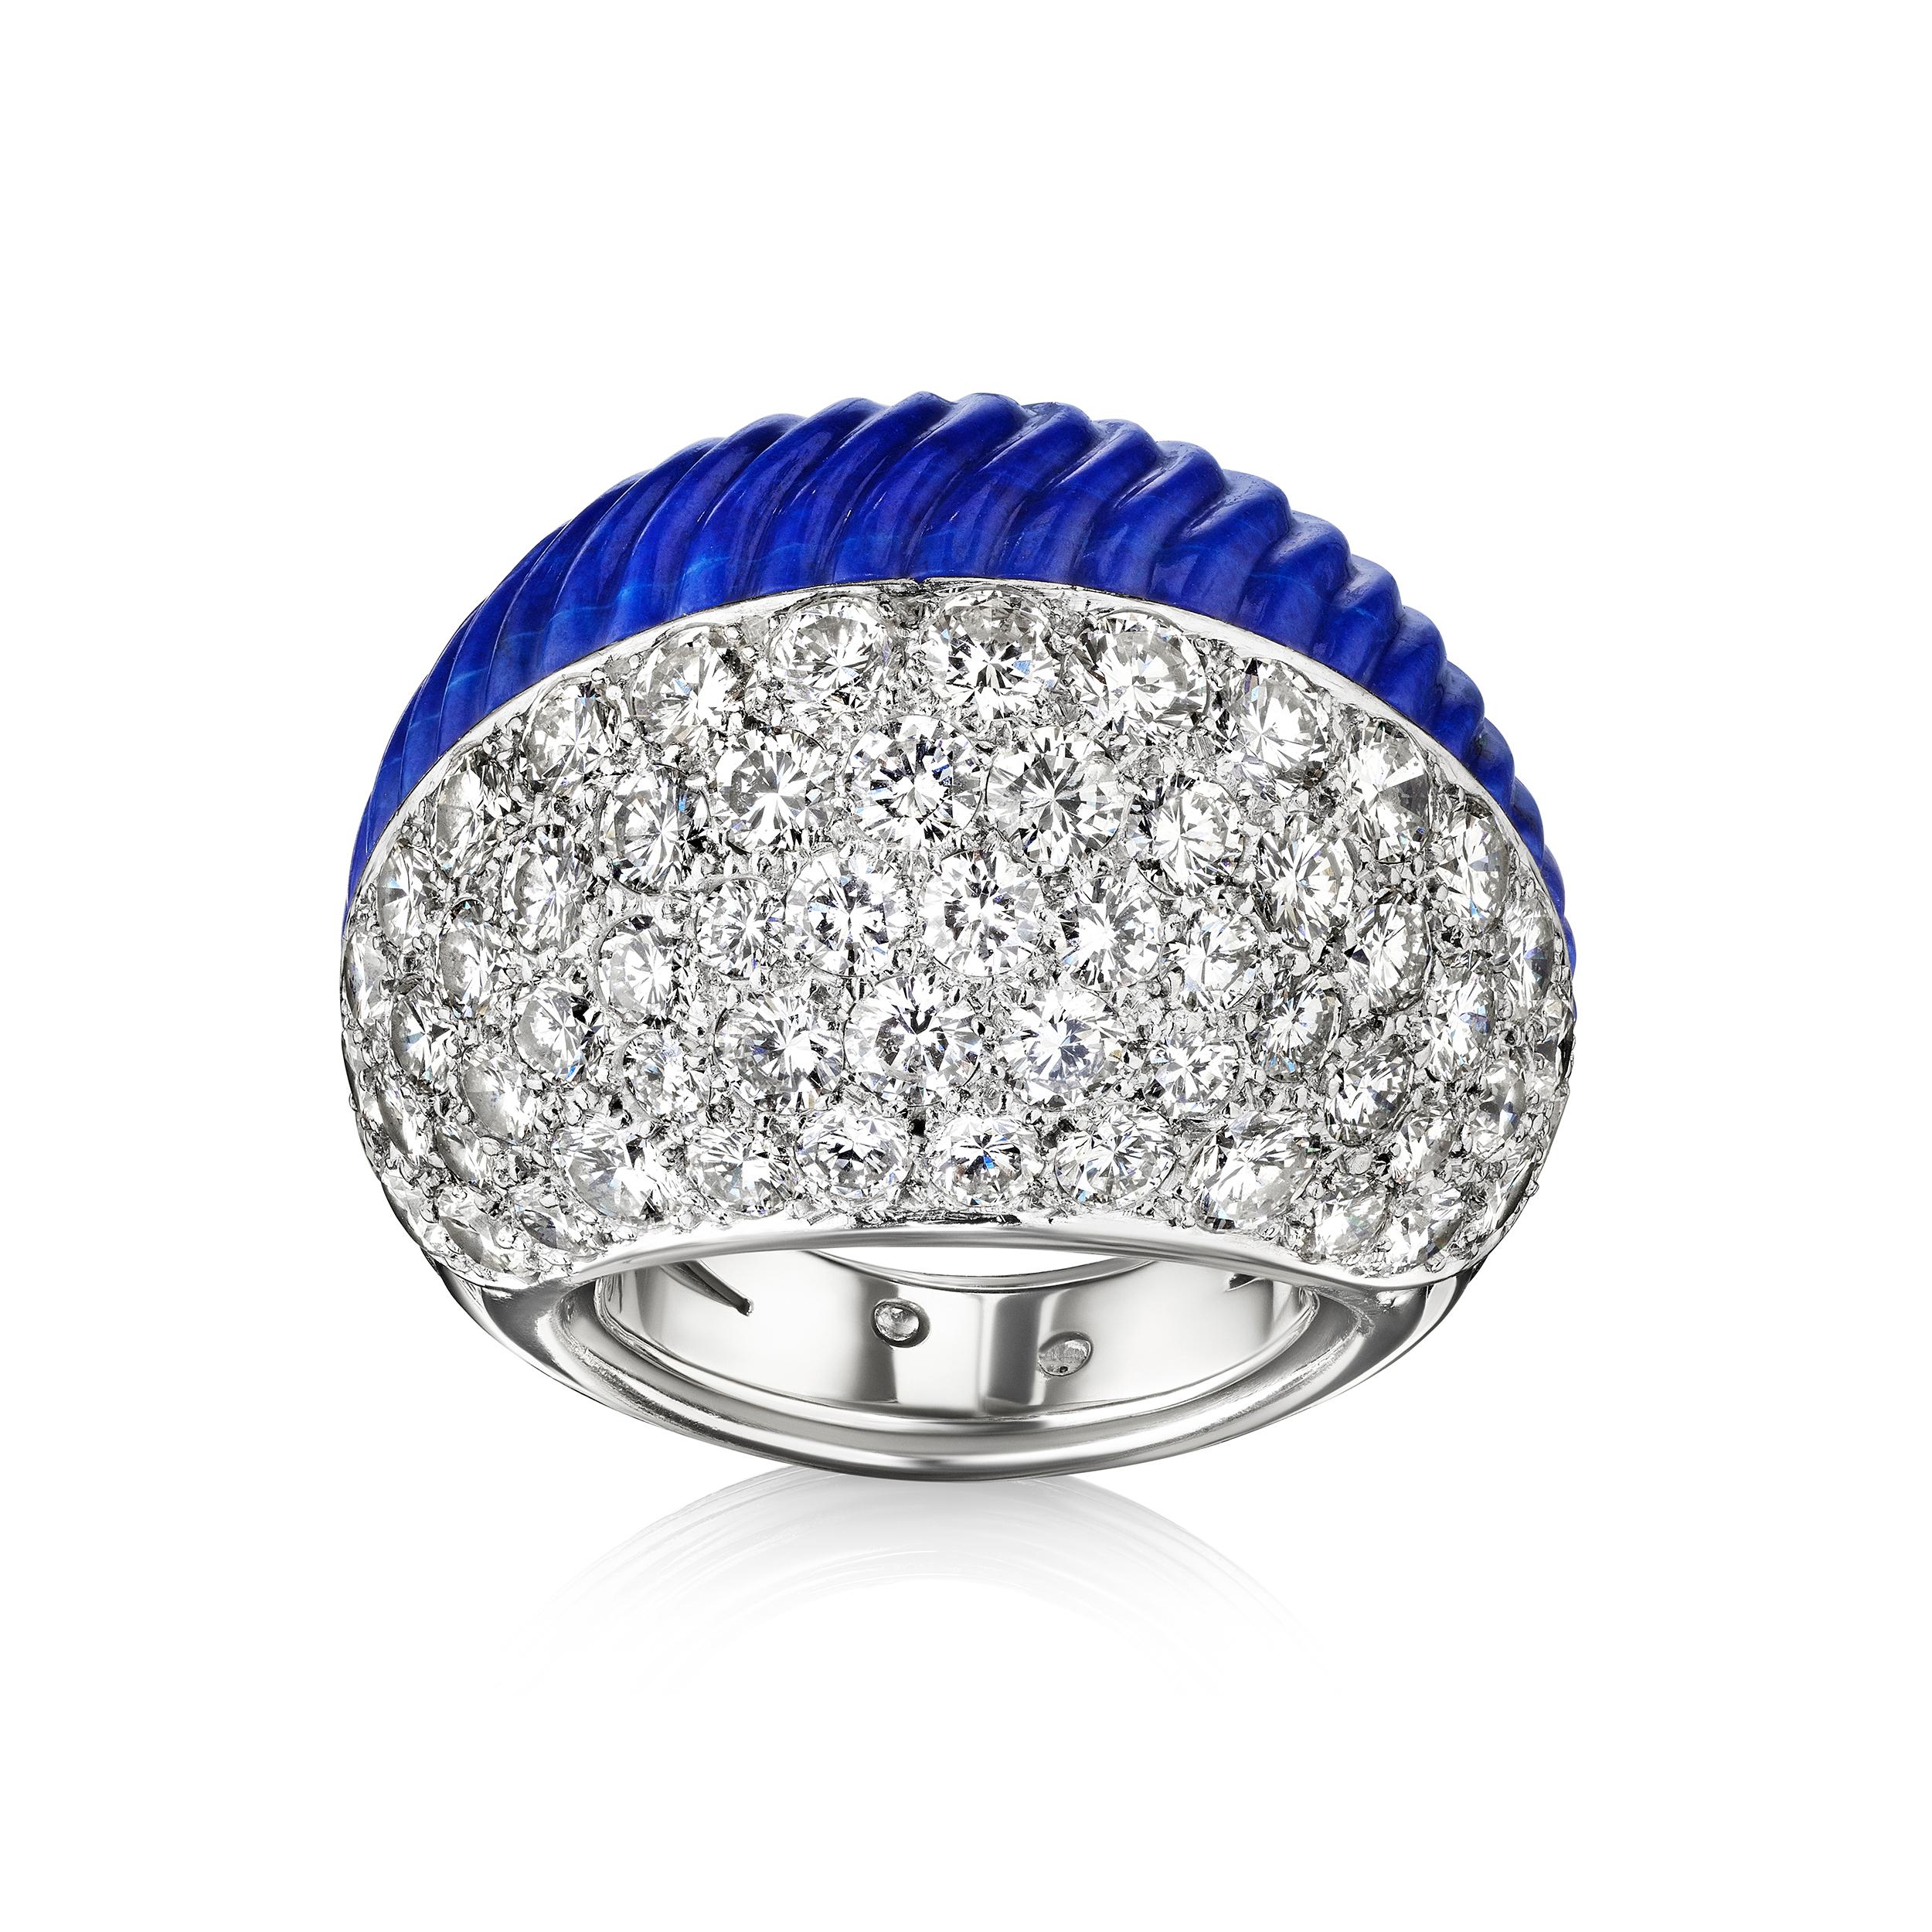 A ring of bombé form composed of half fluted lapis lazuli and half pave-set diamonds; mounted in platinum, with French assay marks
• Diamonds, total weighing approximately 2.5 carats 
• Marks: Cartier Paris 017207
• Measurements: 3/4 x 1 x 1 1/8